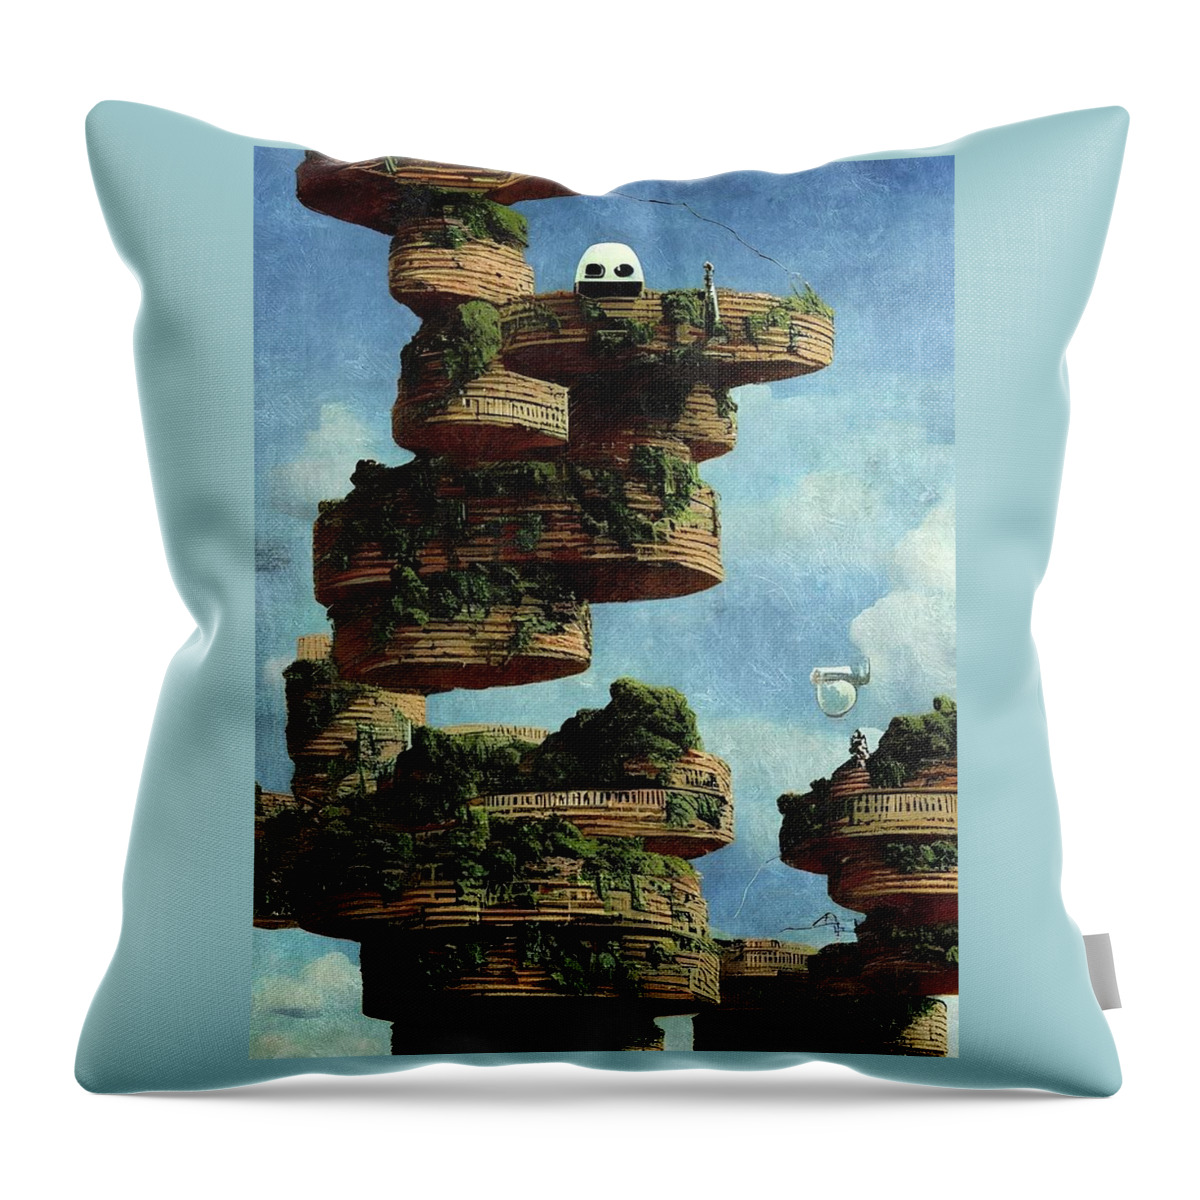 Apocalypse Throw Pillow featuring the digital art Vertical Gardens by Ally White